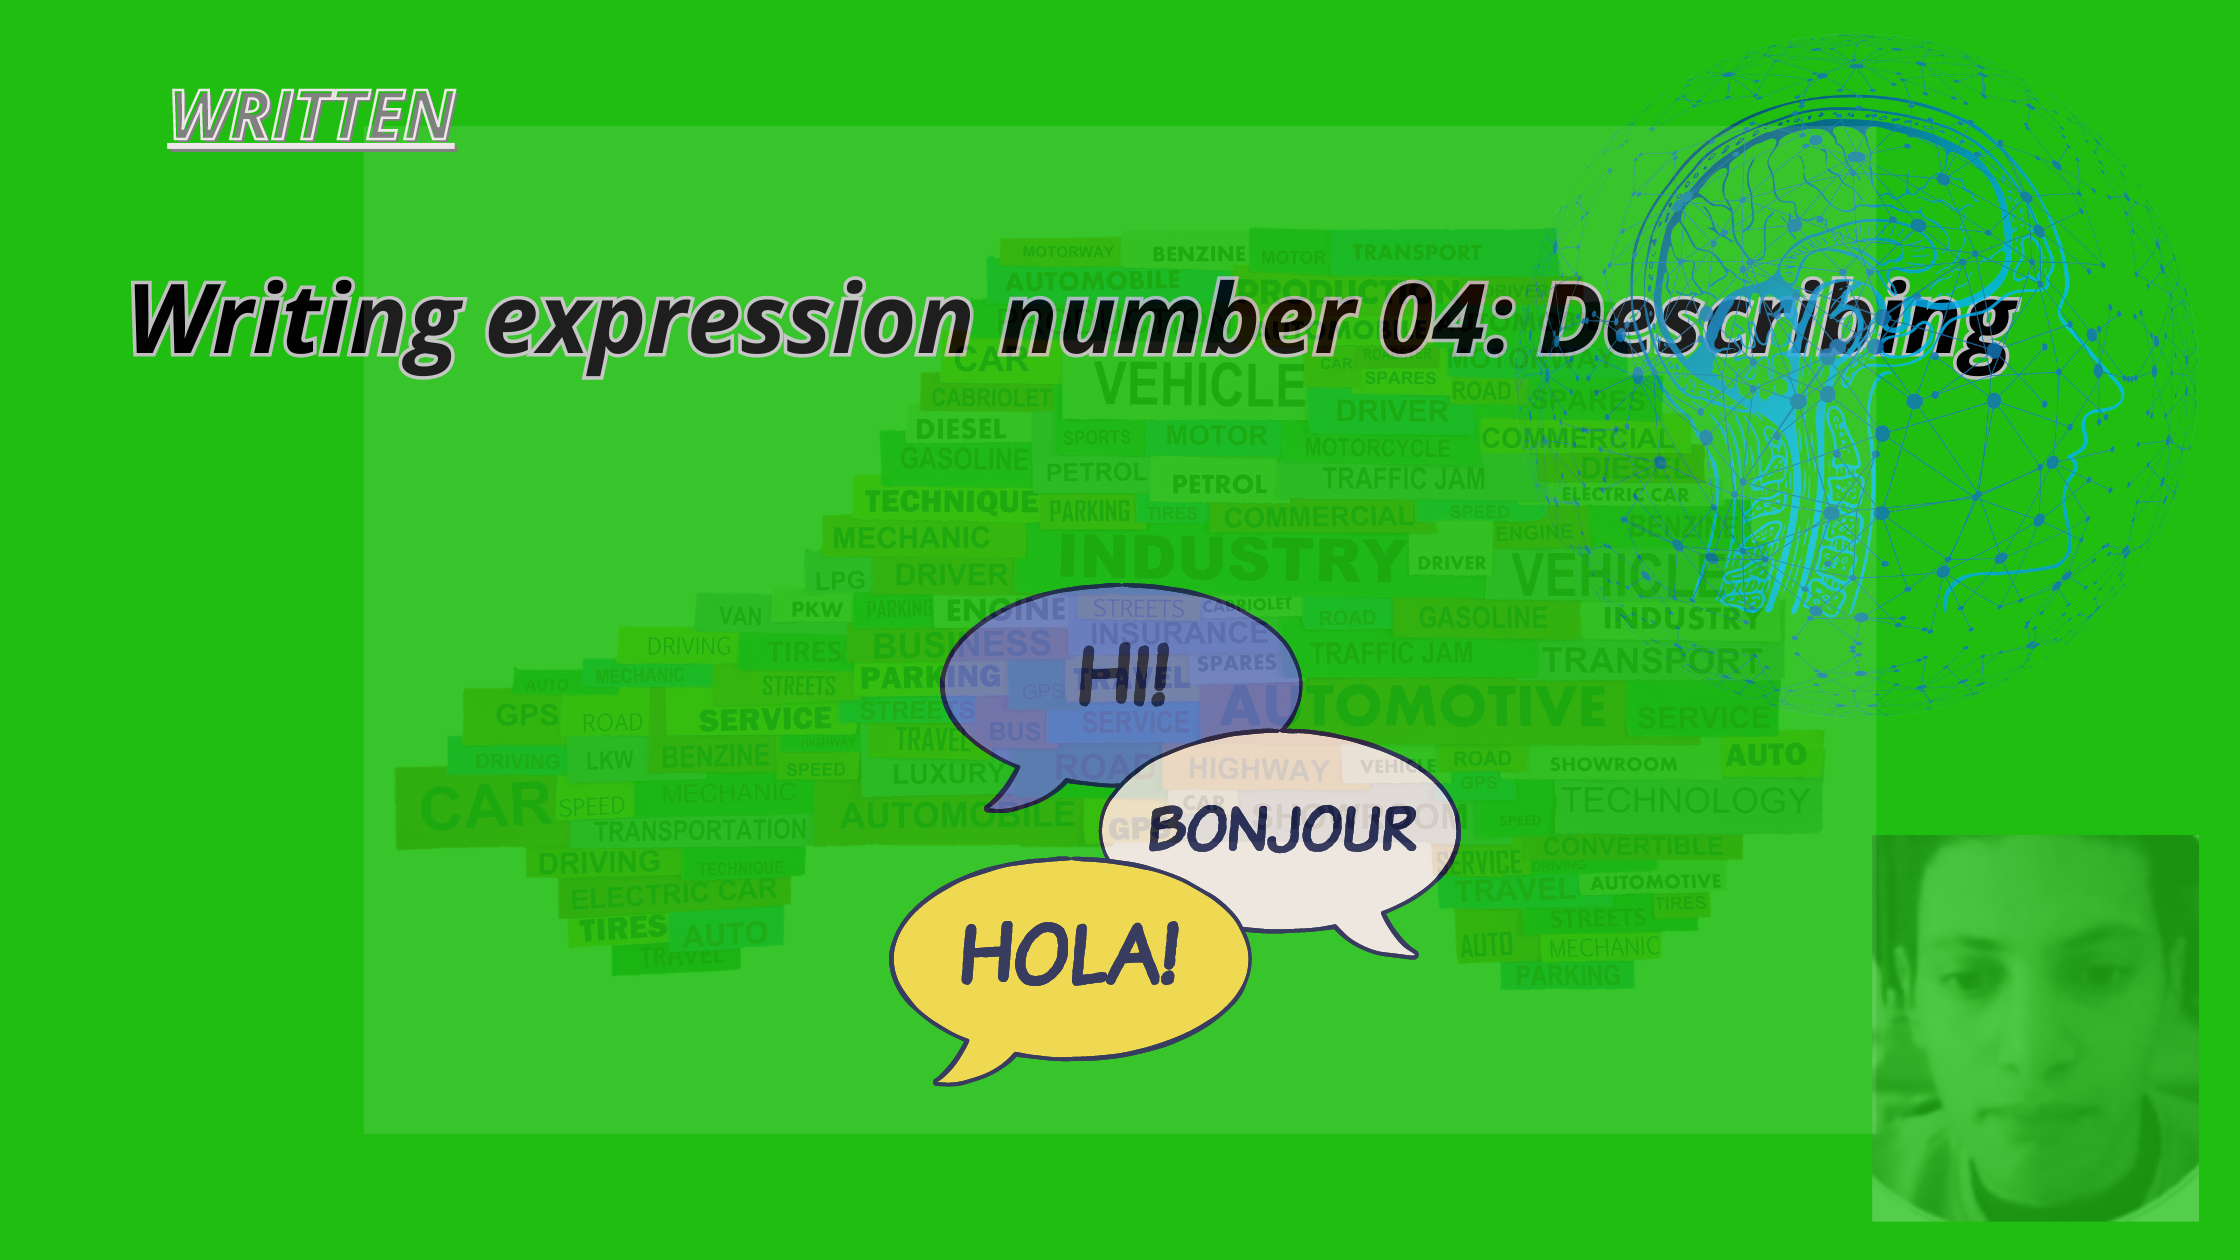 Writting expression number 04: Describing